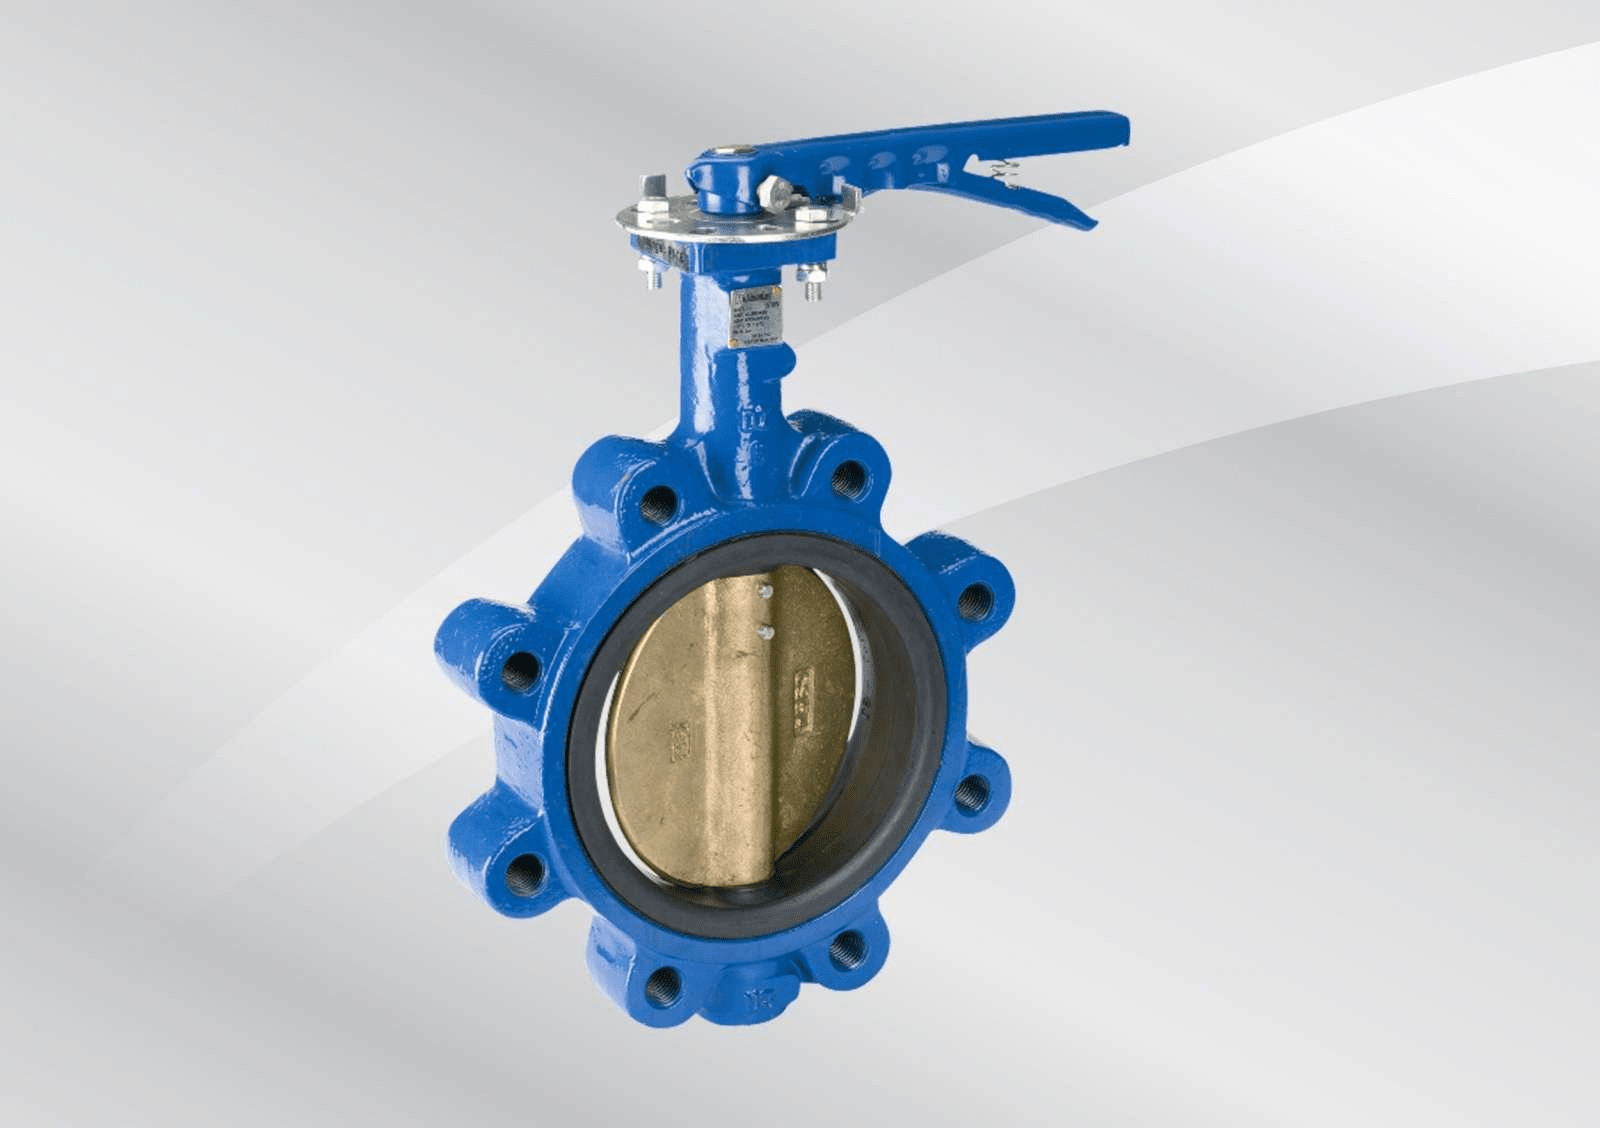 What is a Butterfly Valve? How does it Function?